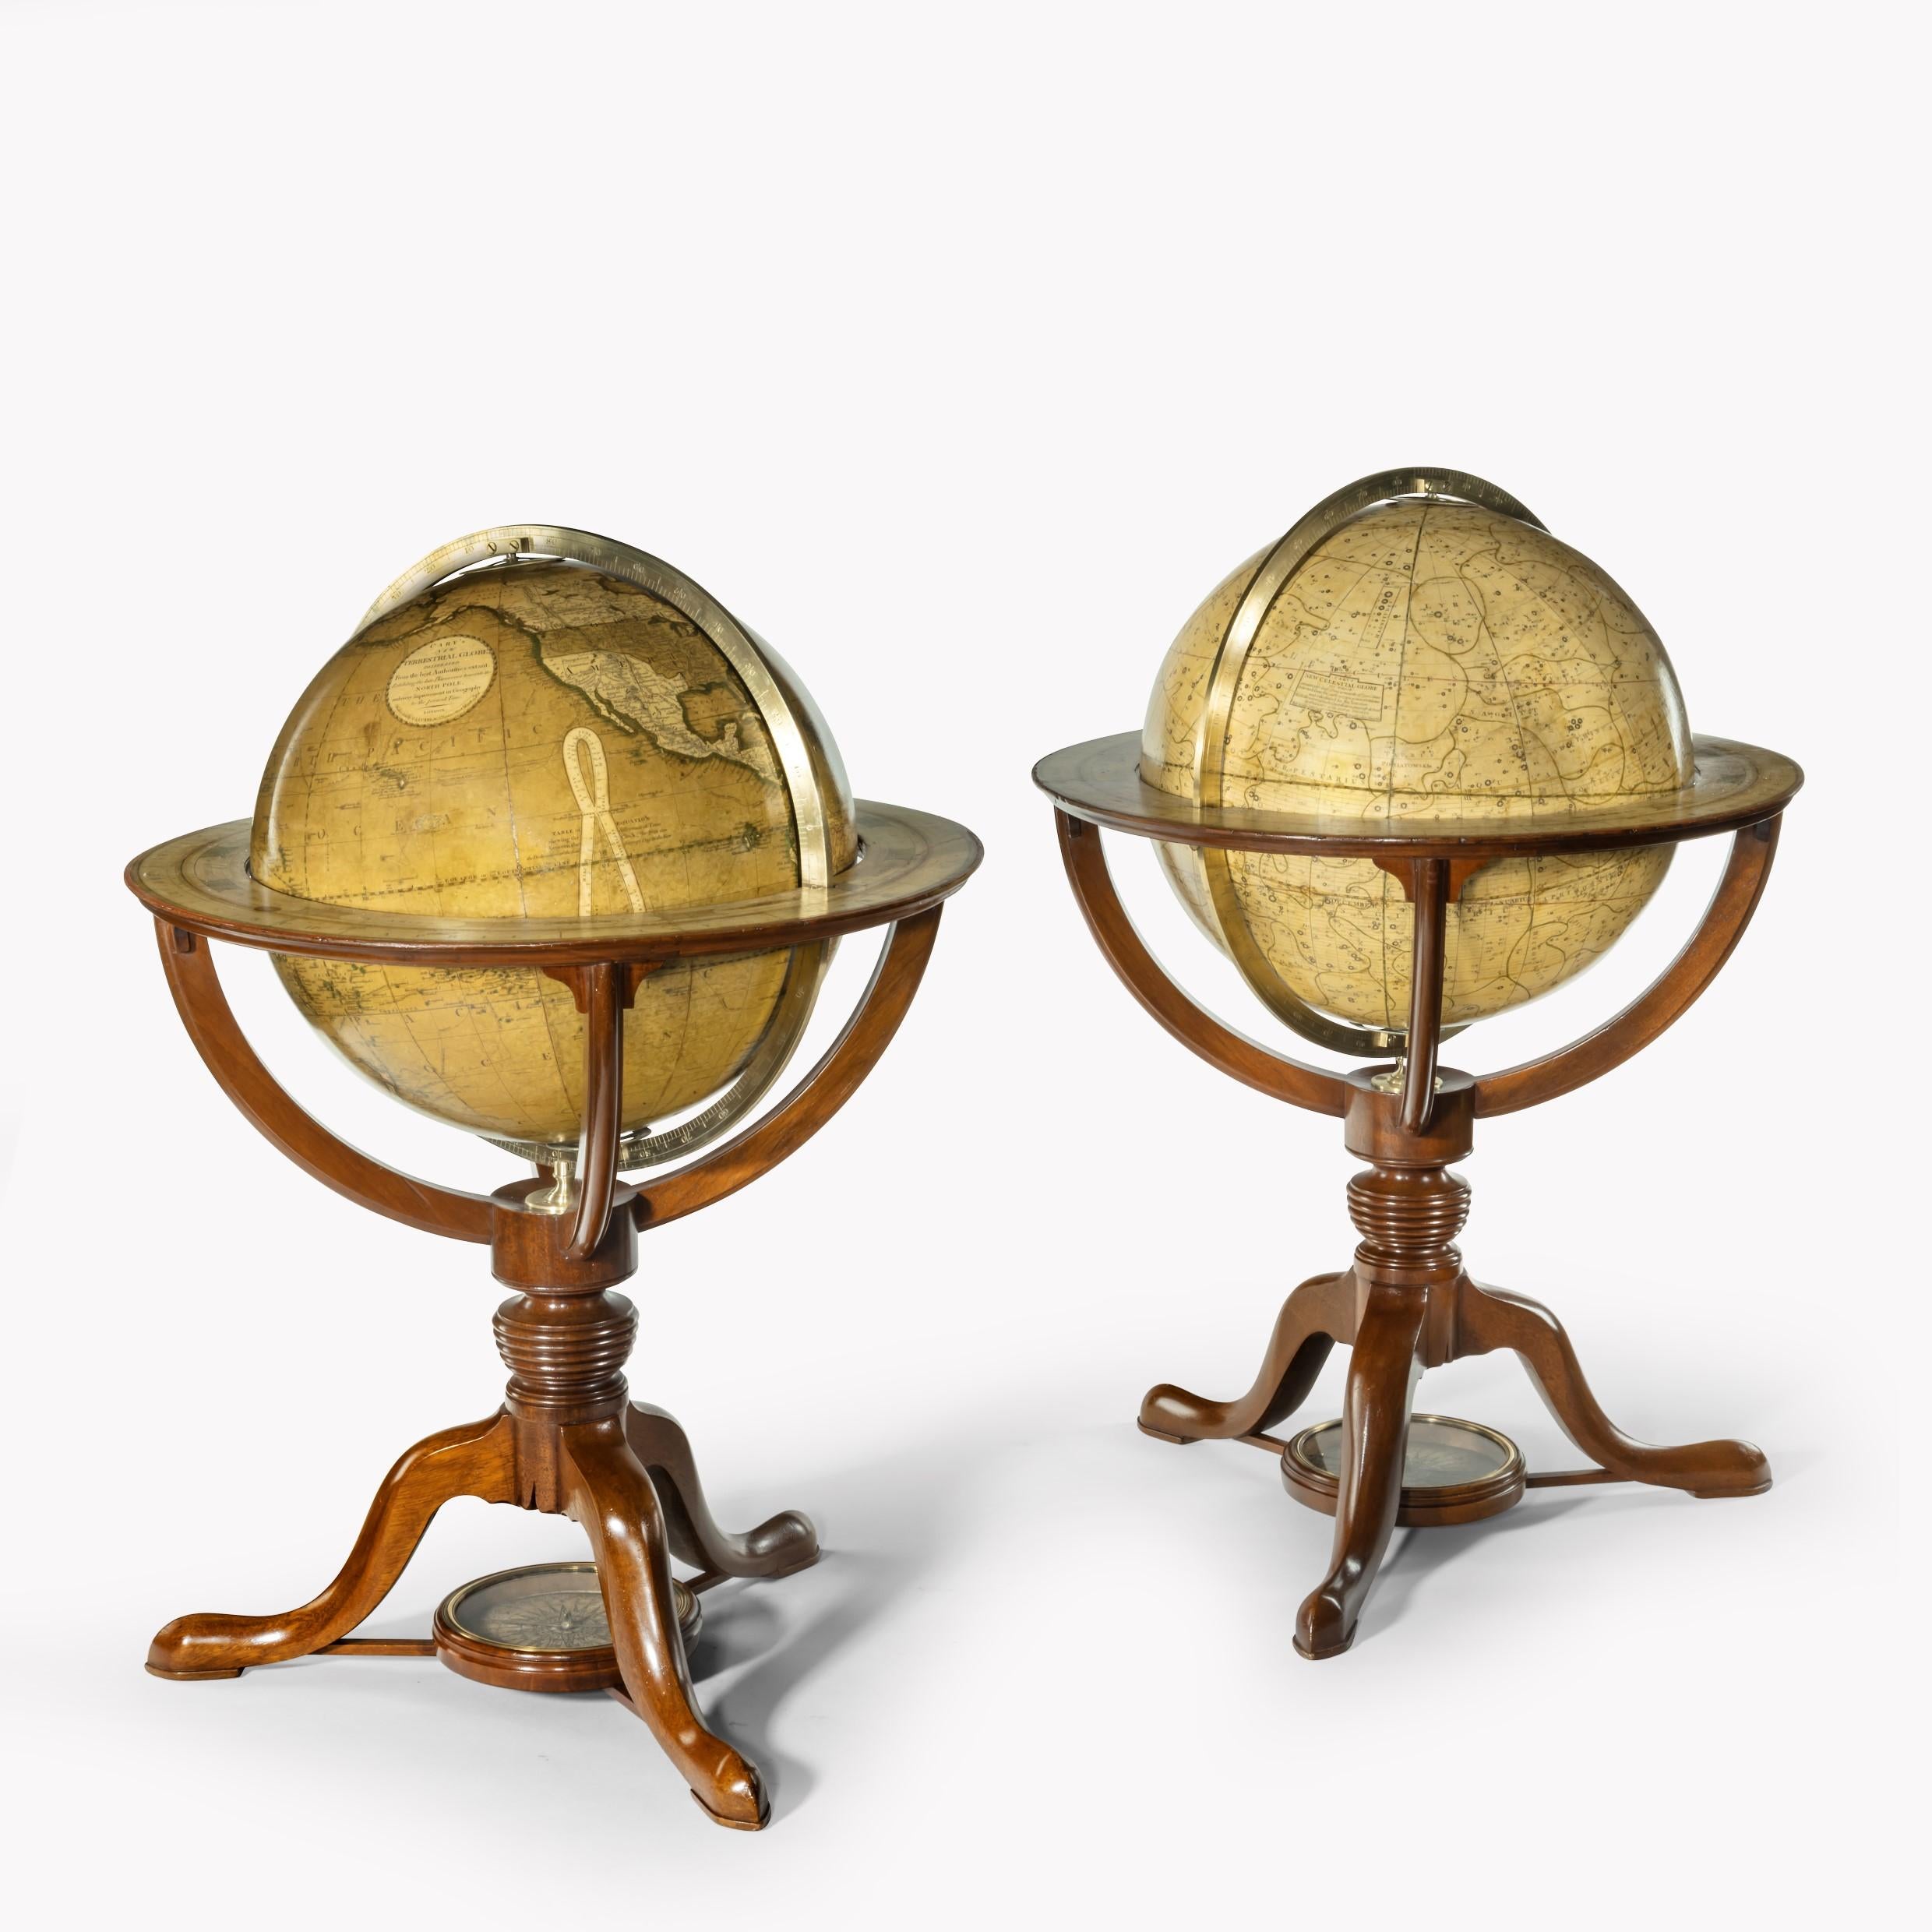 A pair of 12 inch table globes by G & J Cary, dated 1800 and 1821, each with hand-painted gores, set in mahogany stands with a turned support raised on three feet centred on the company roses. English.

